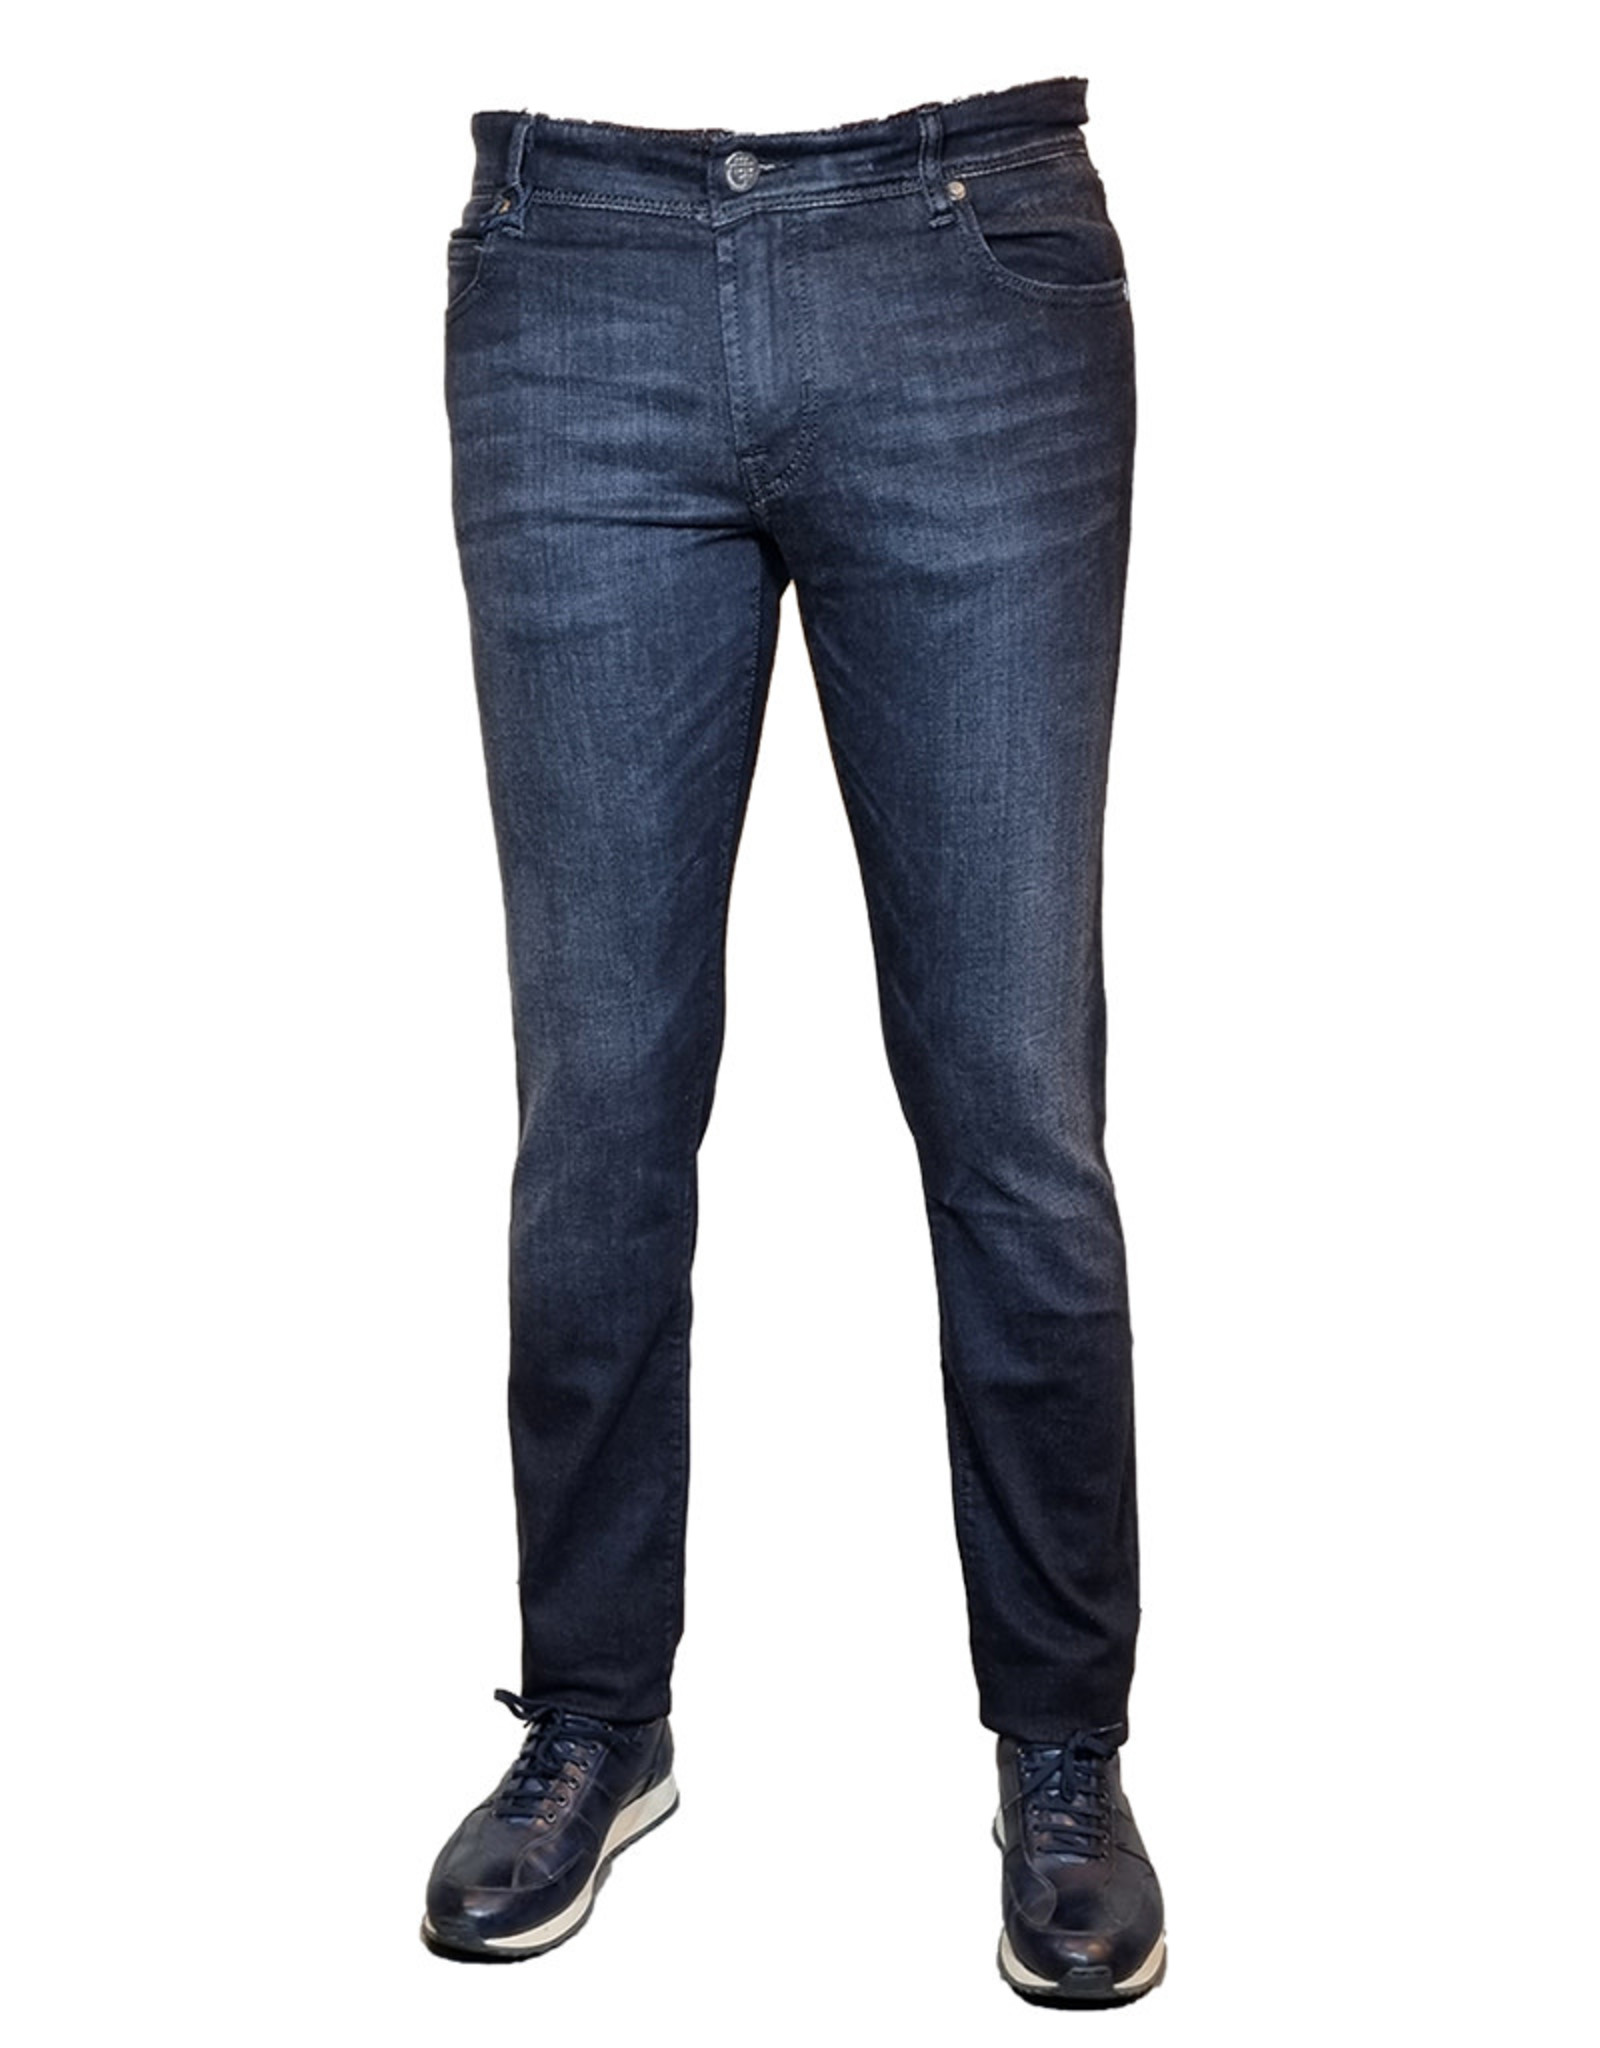 Candiani Candiani jeans almost black 2409